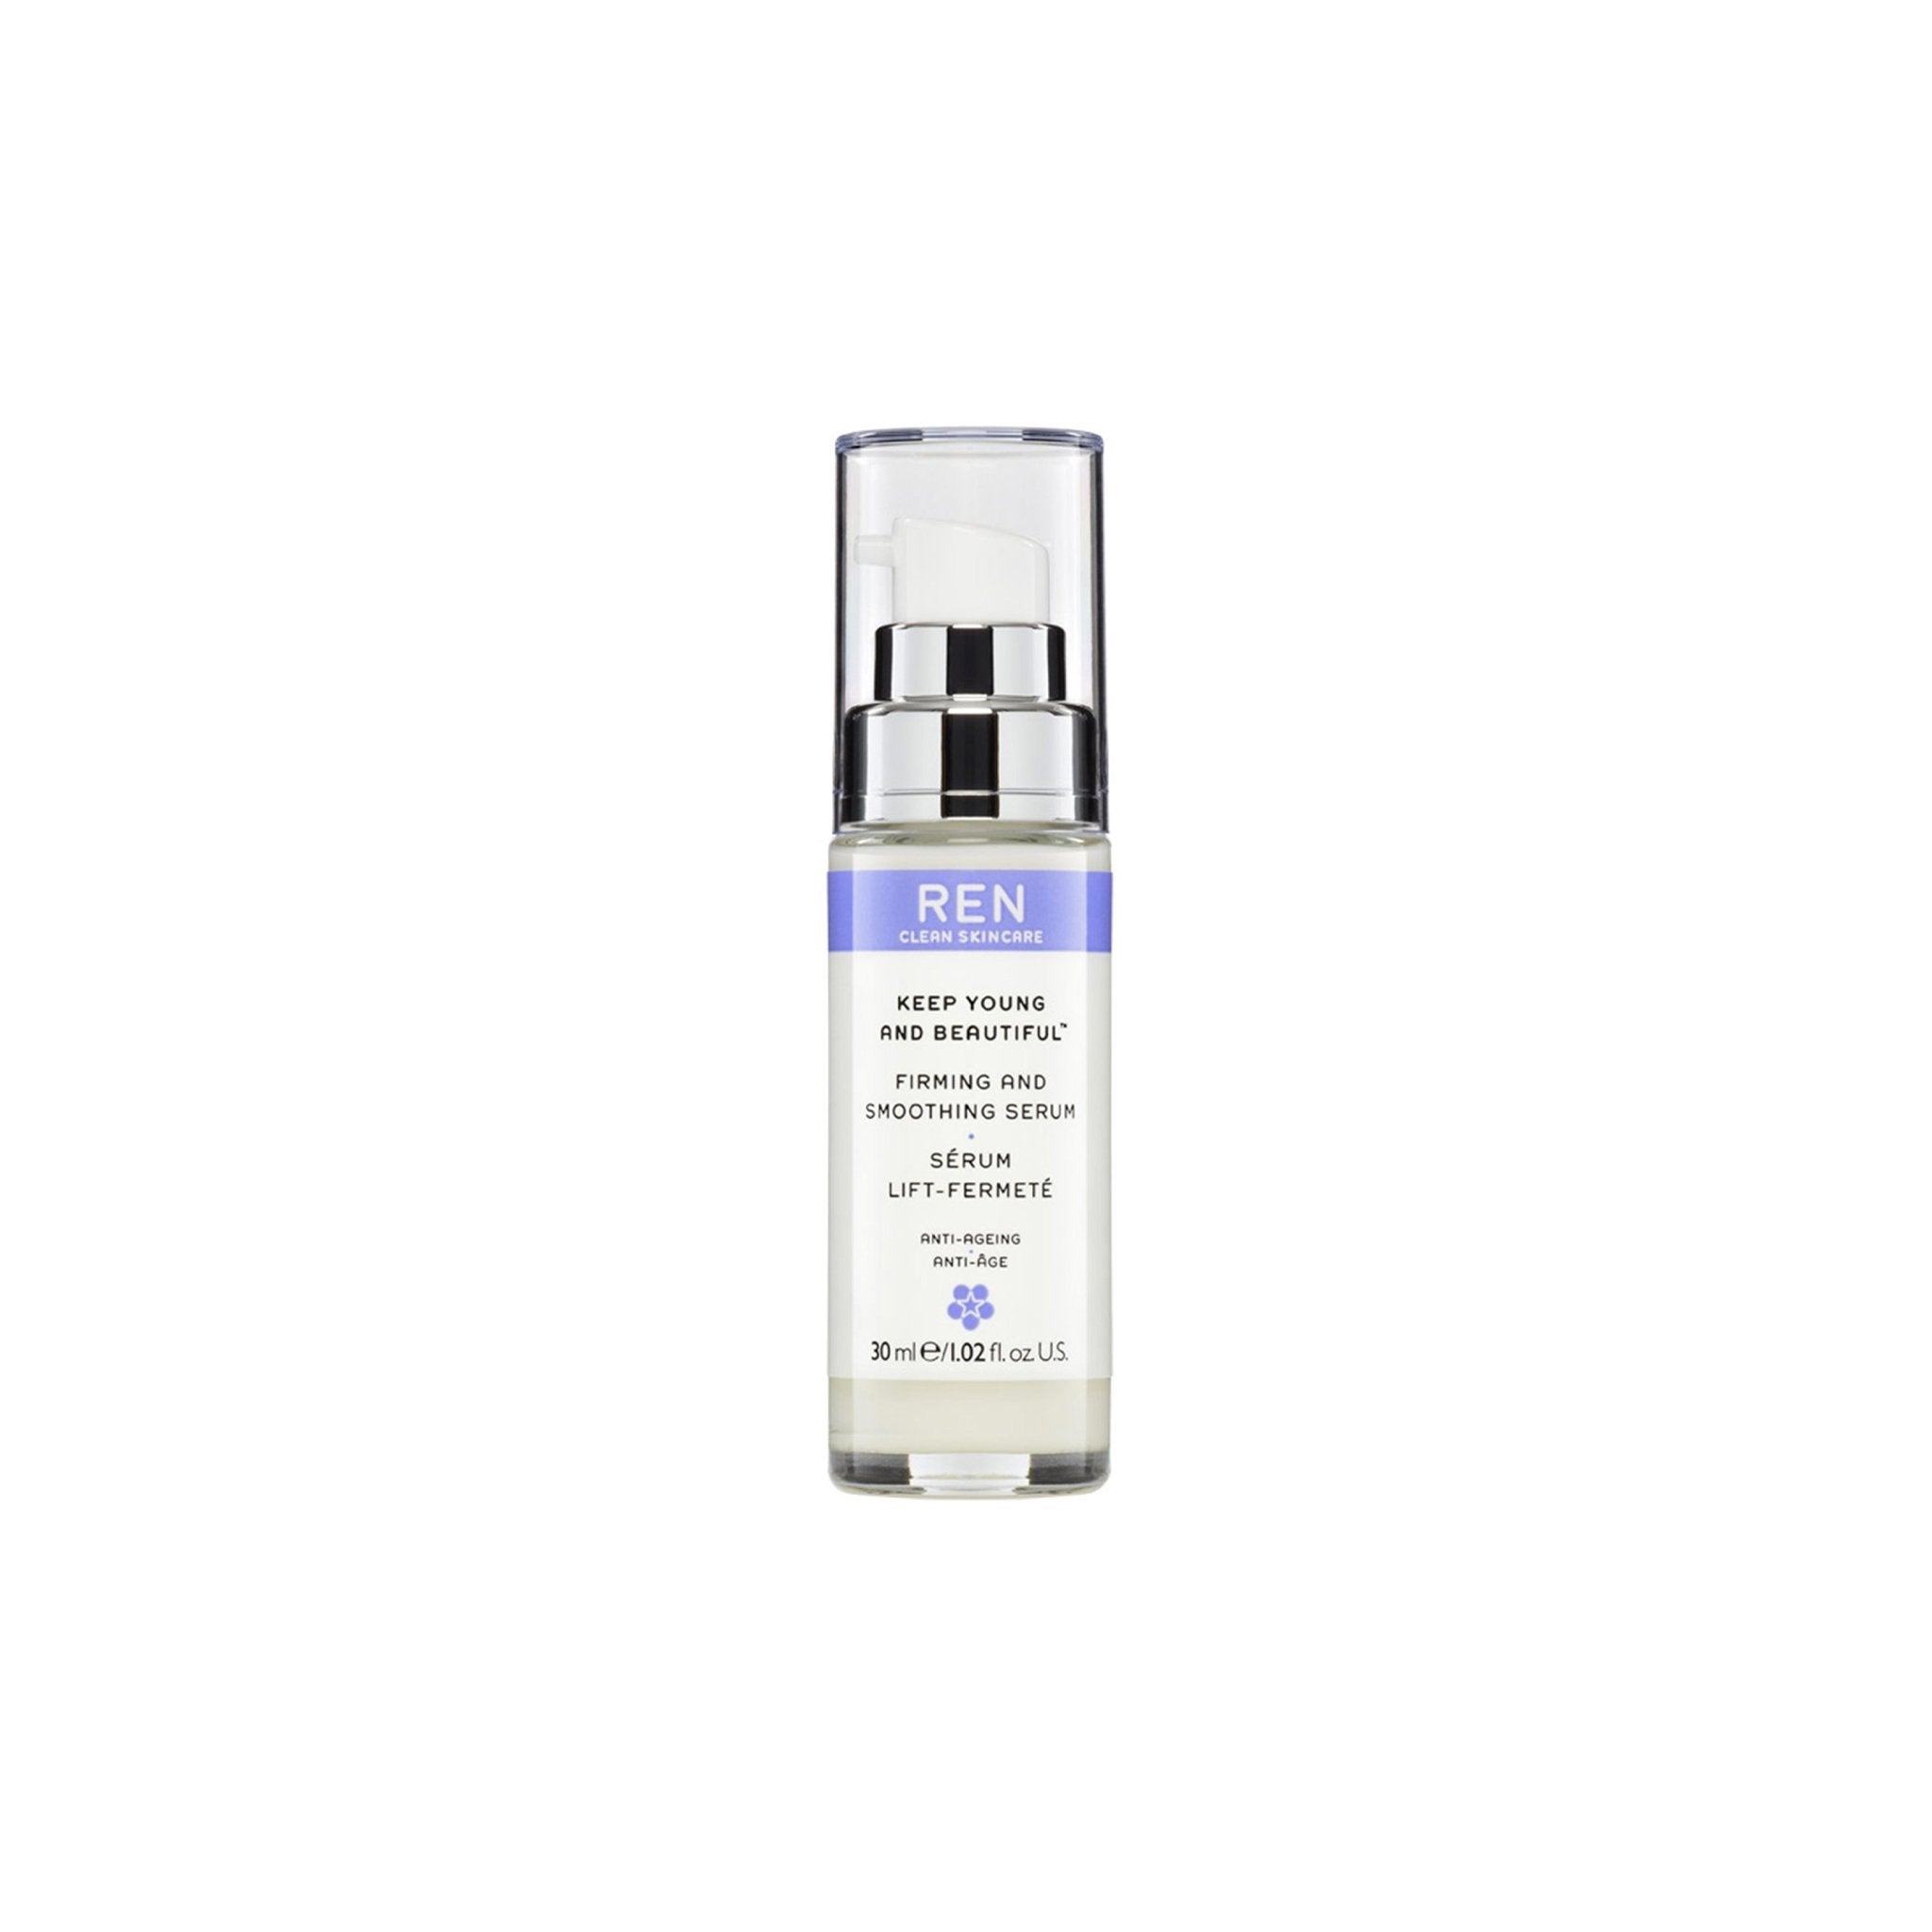 REN Keep Young & Beautiful Firming and Smoothing Serum 30ml